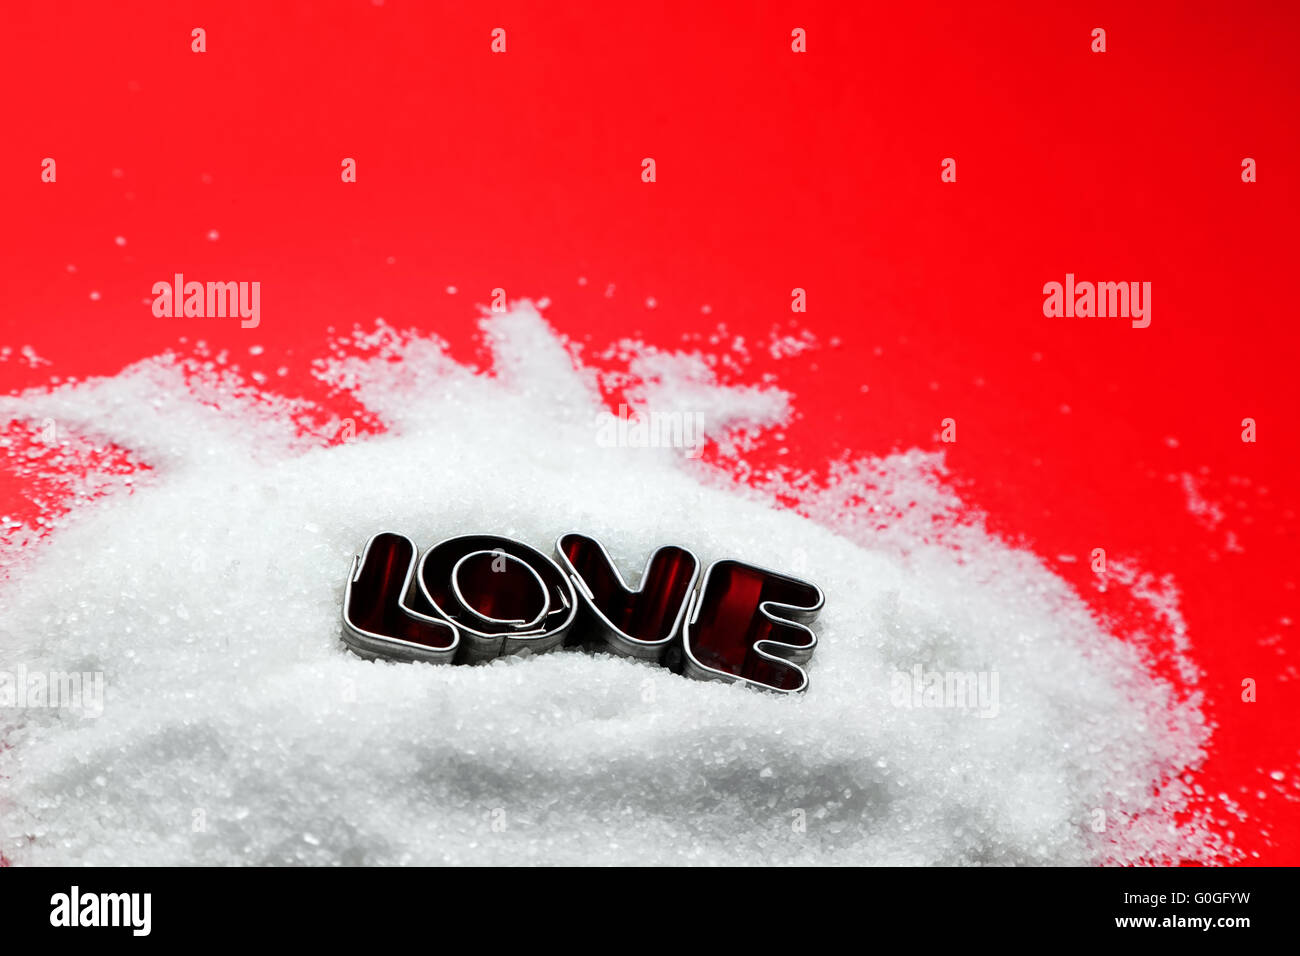 Love text message from cookie form letters on sugar and red background. Valentines Day theme Stock Photo